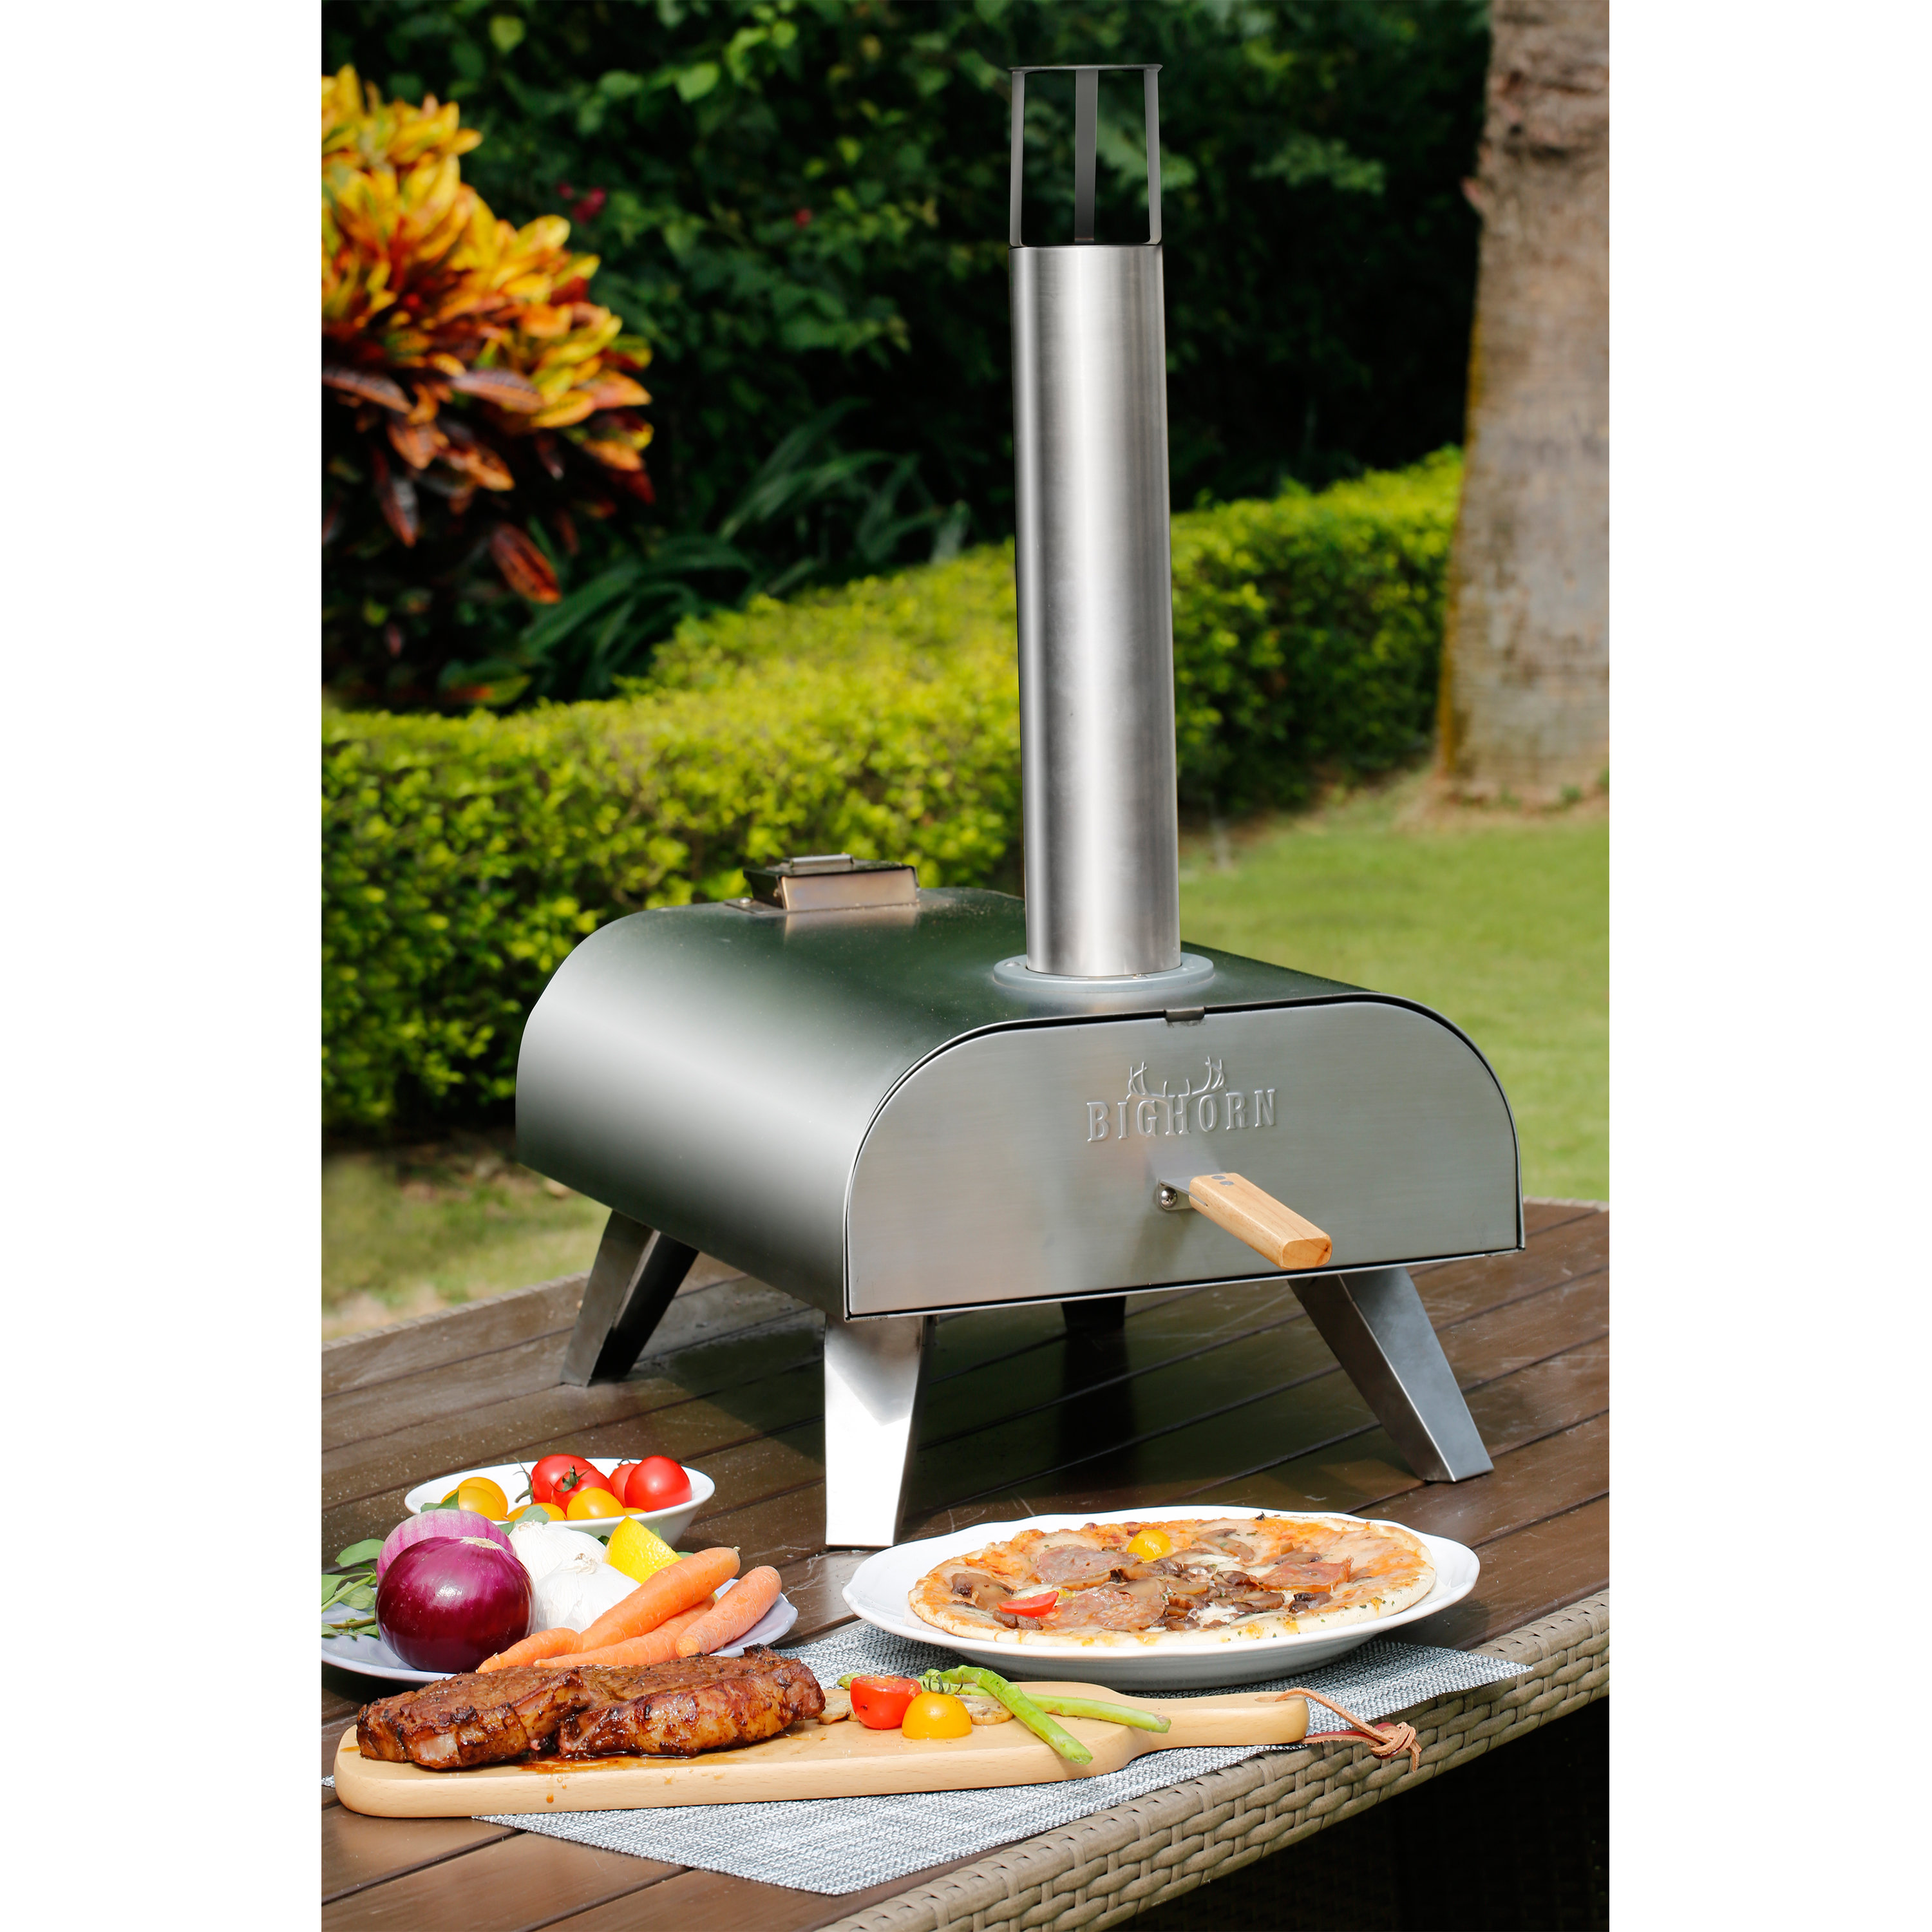 Outdoor Pizza Maker Stainless Steel Wood Pellet Pizza Oven w